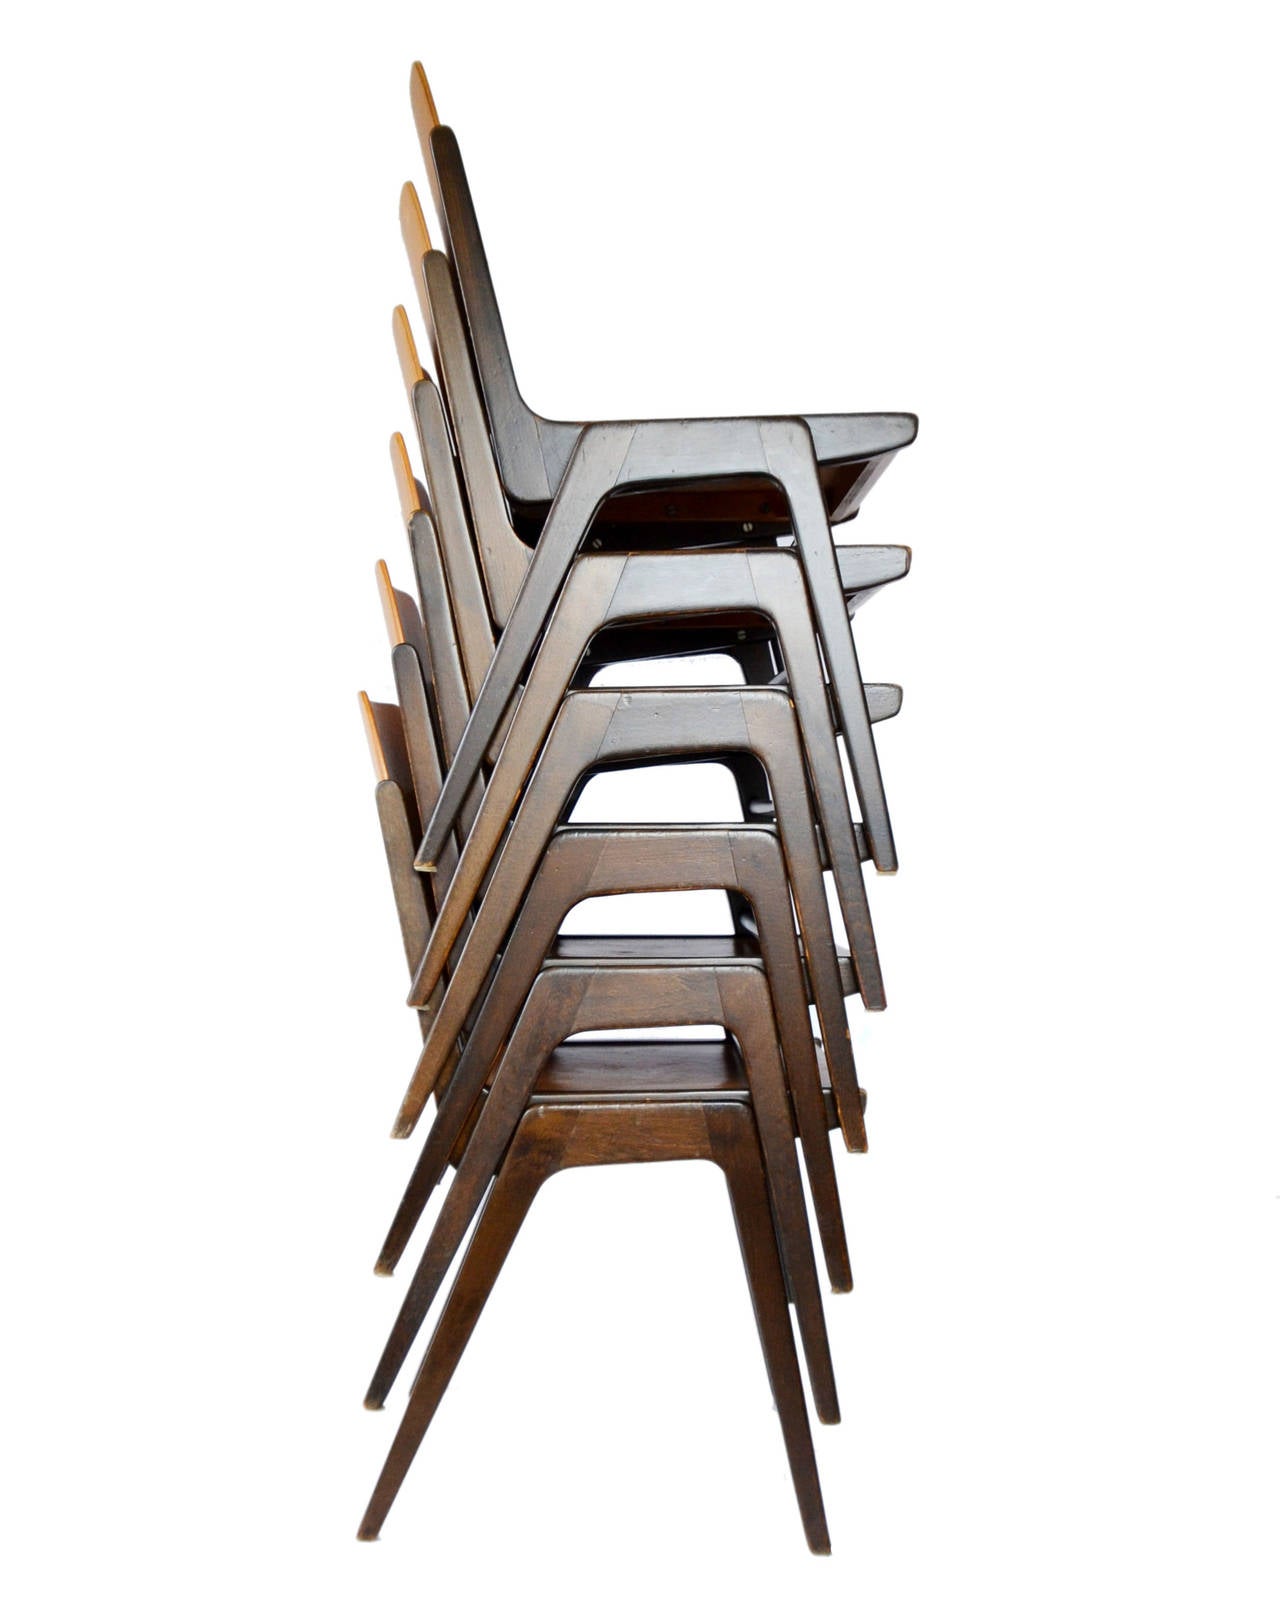 One of 12 Stacking Chairs Franz Schuster, Bicolored Beech, Austria, 1959 For Sale 3